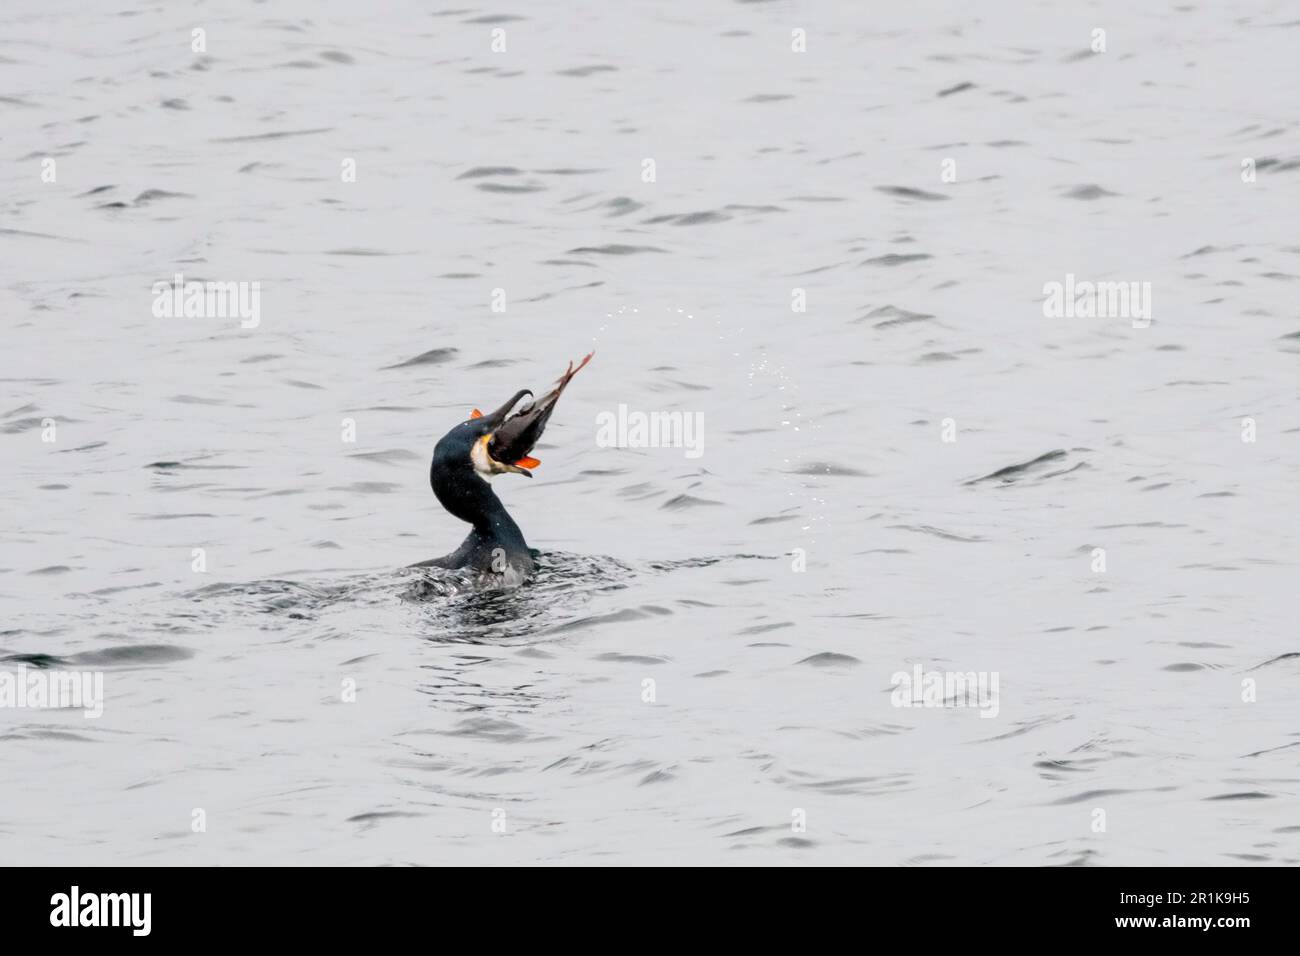 A cormorant, Phalacrocorax carbo, attempting to swallow a large fish it has just caught.  Off Yell, Shetland. Stock Photo